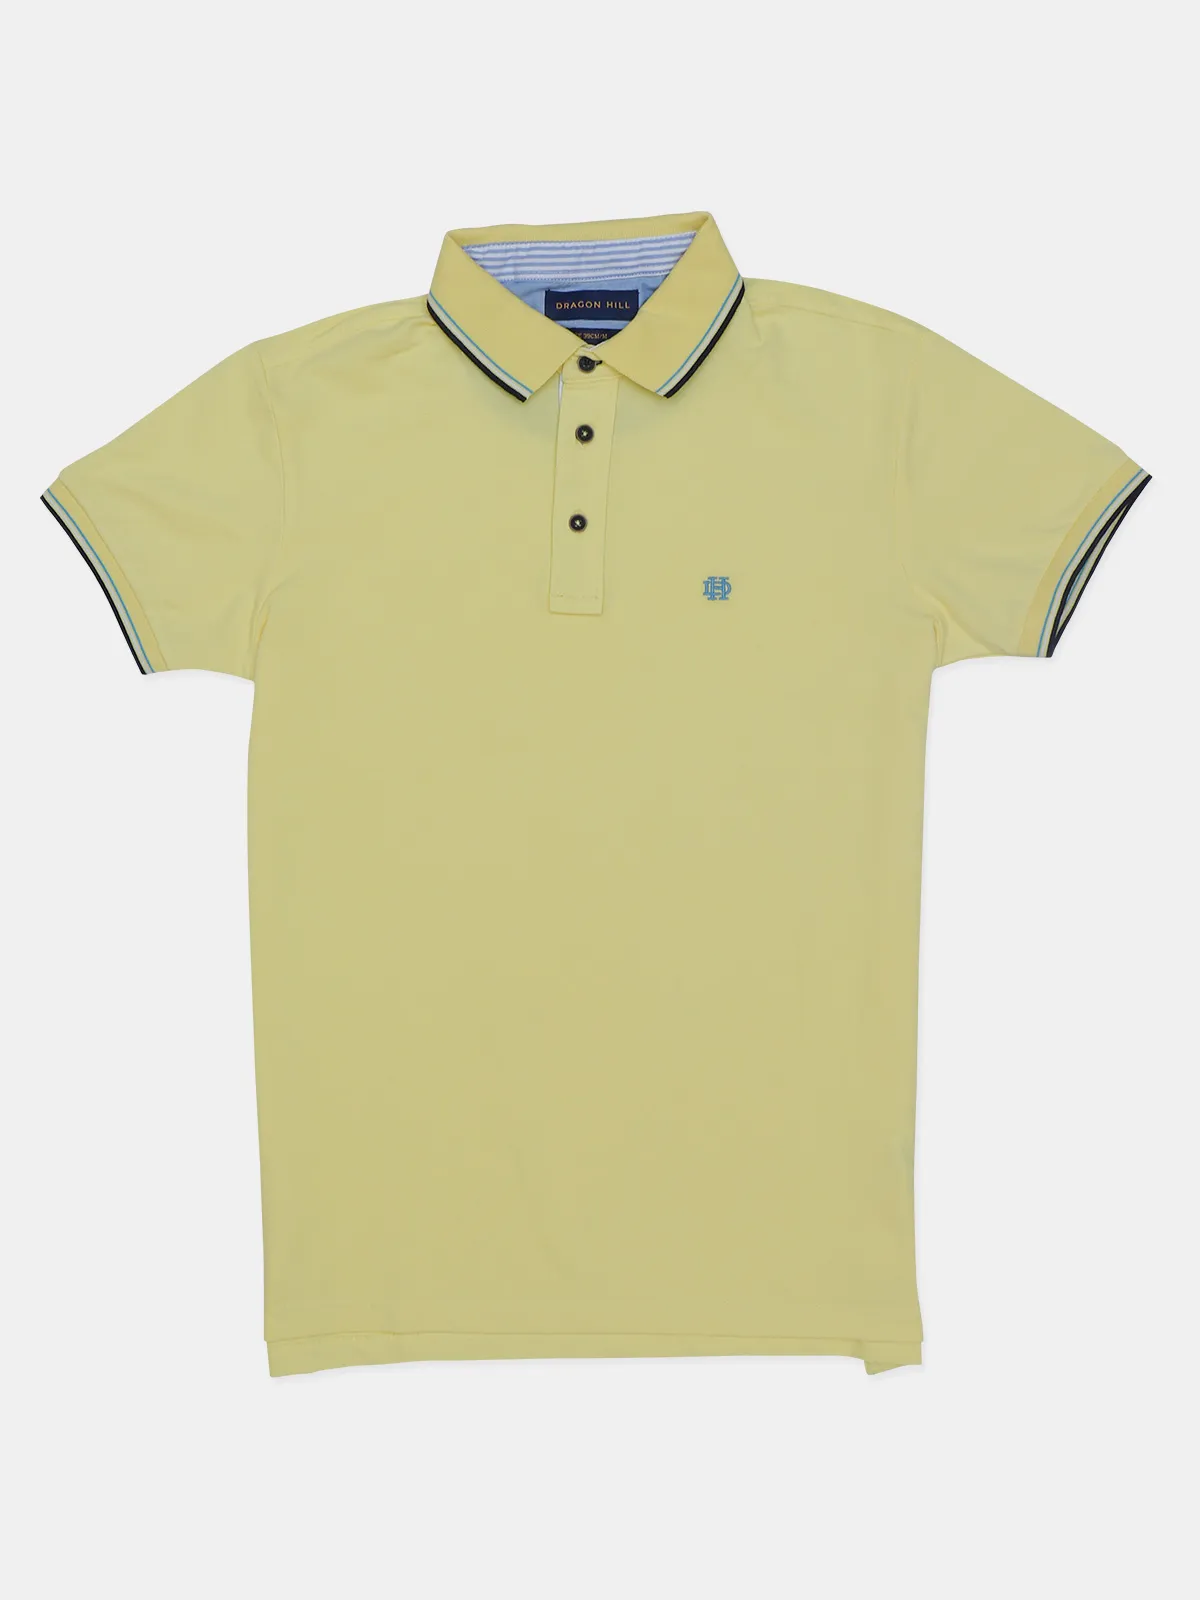 Dragon Hill cotton slim fit solid t shirt in lime yellow